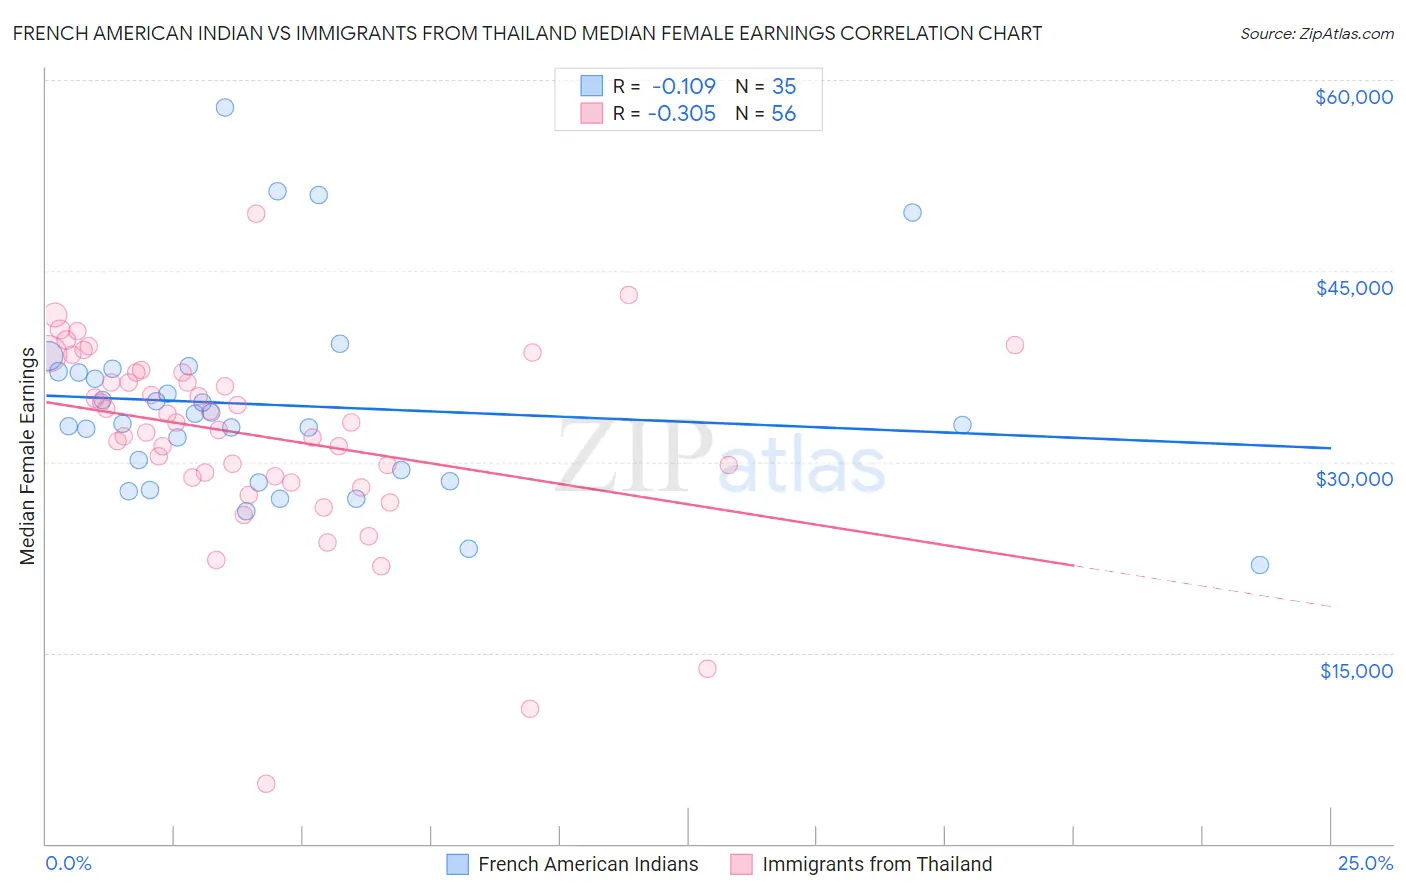 French American Indian vs Immigrants from Thailand Median Female Earnings